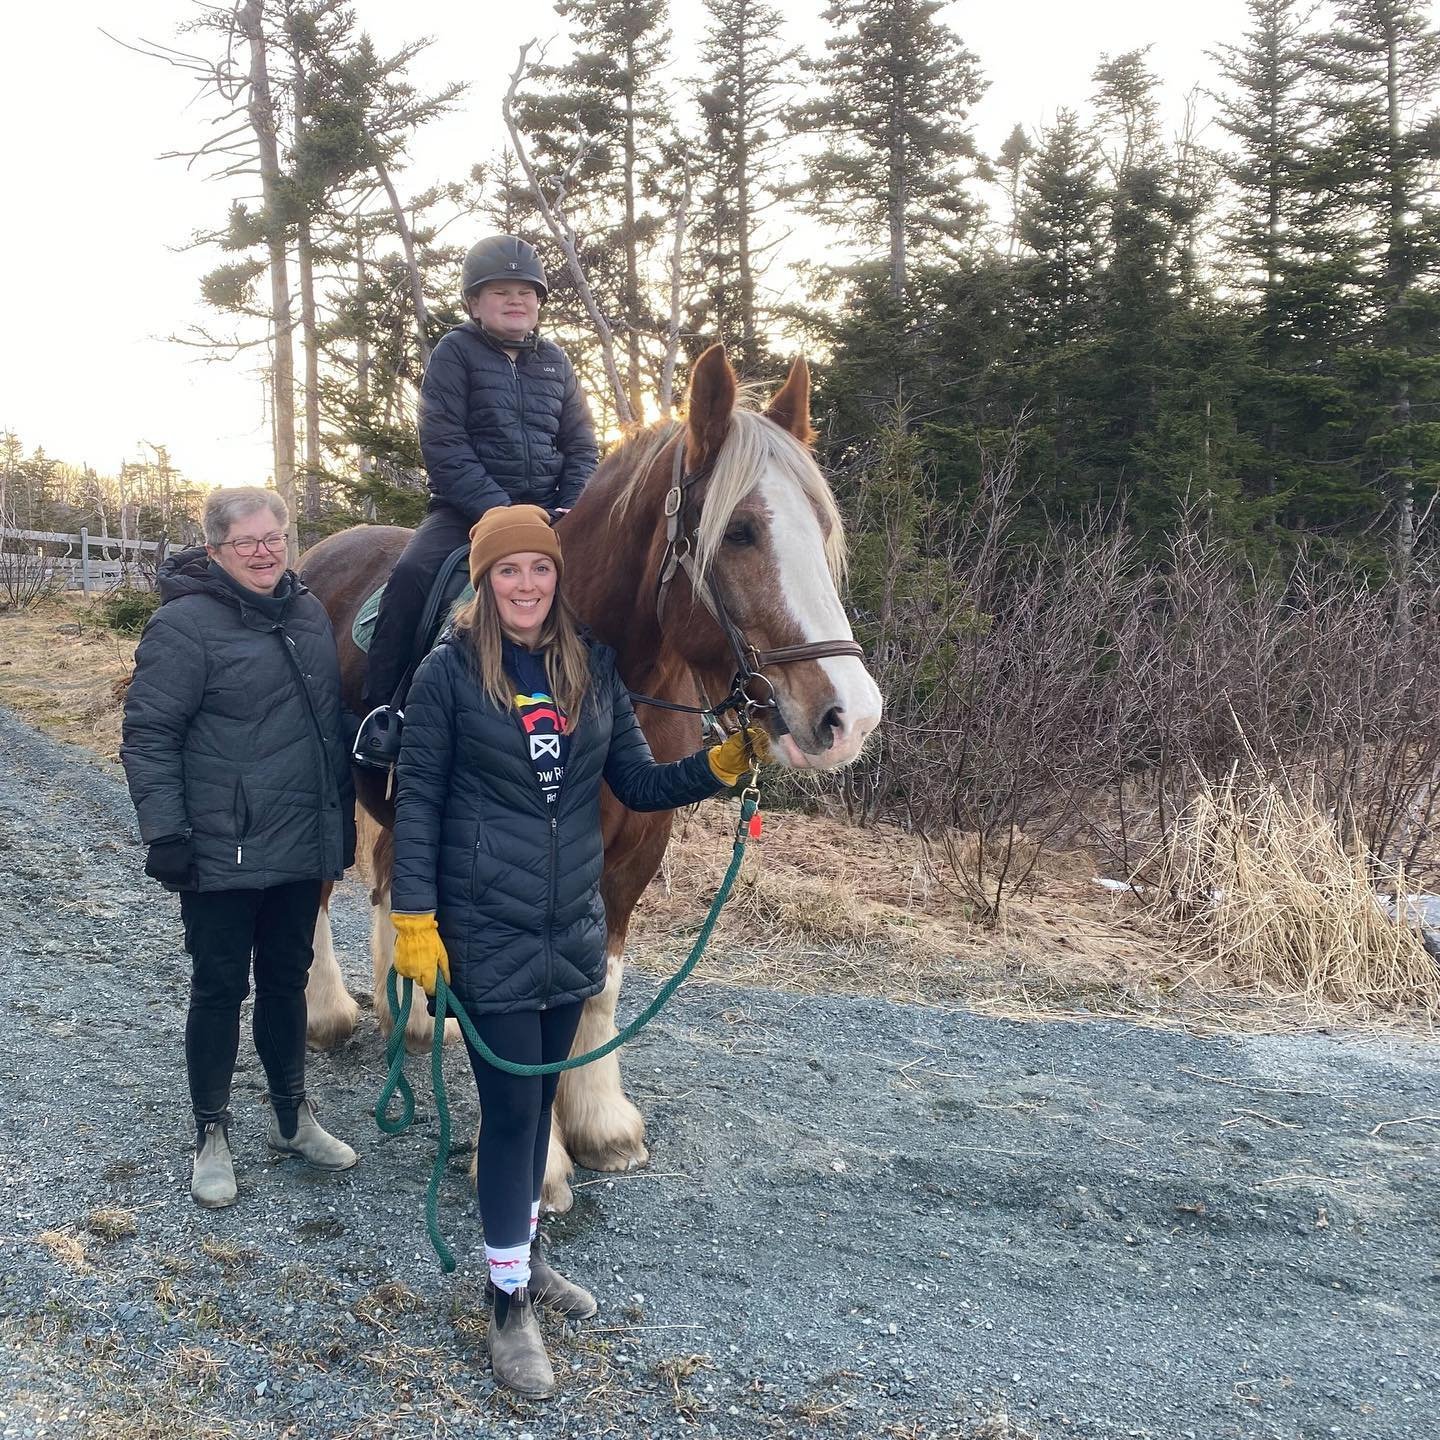 Our horses and participants are so happy to be hitting the trails again! #theraputicriding